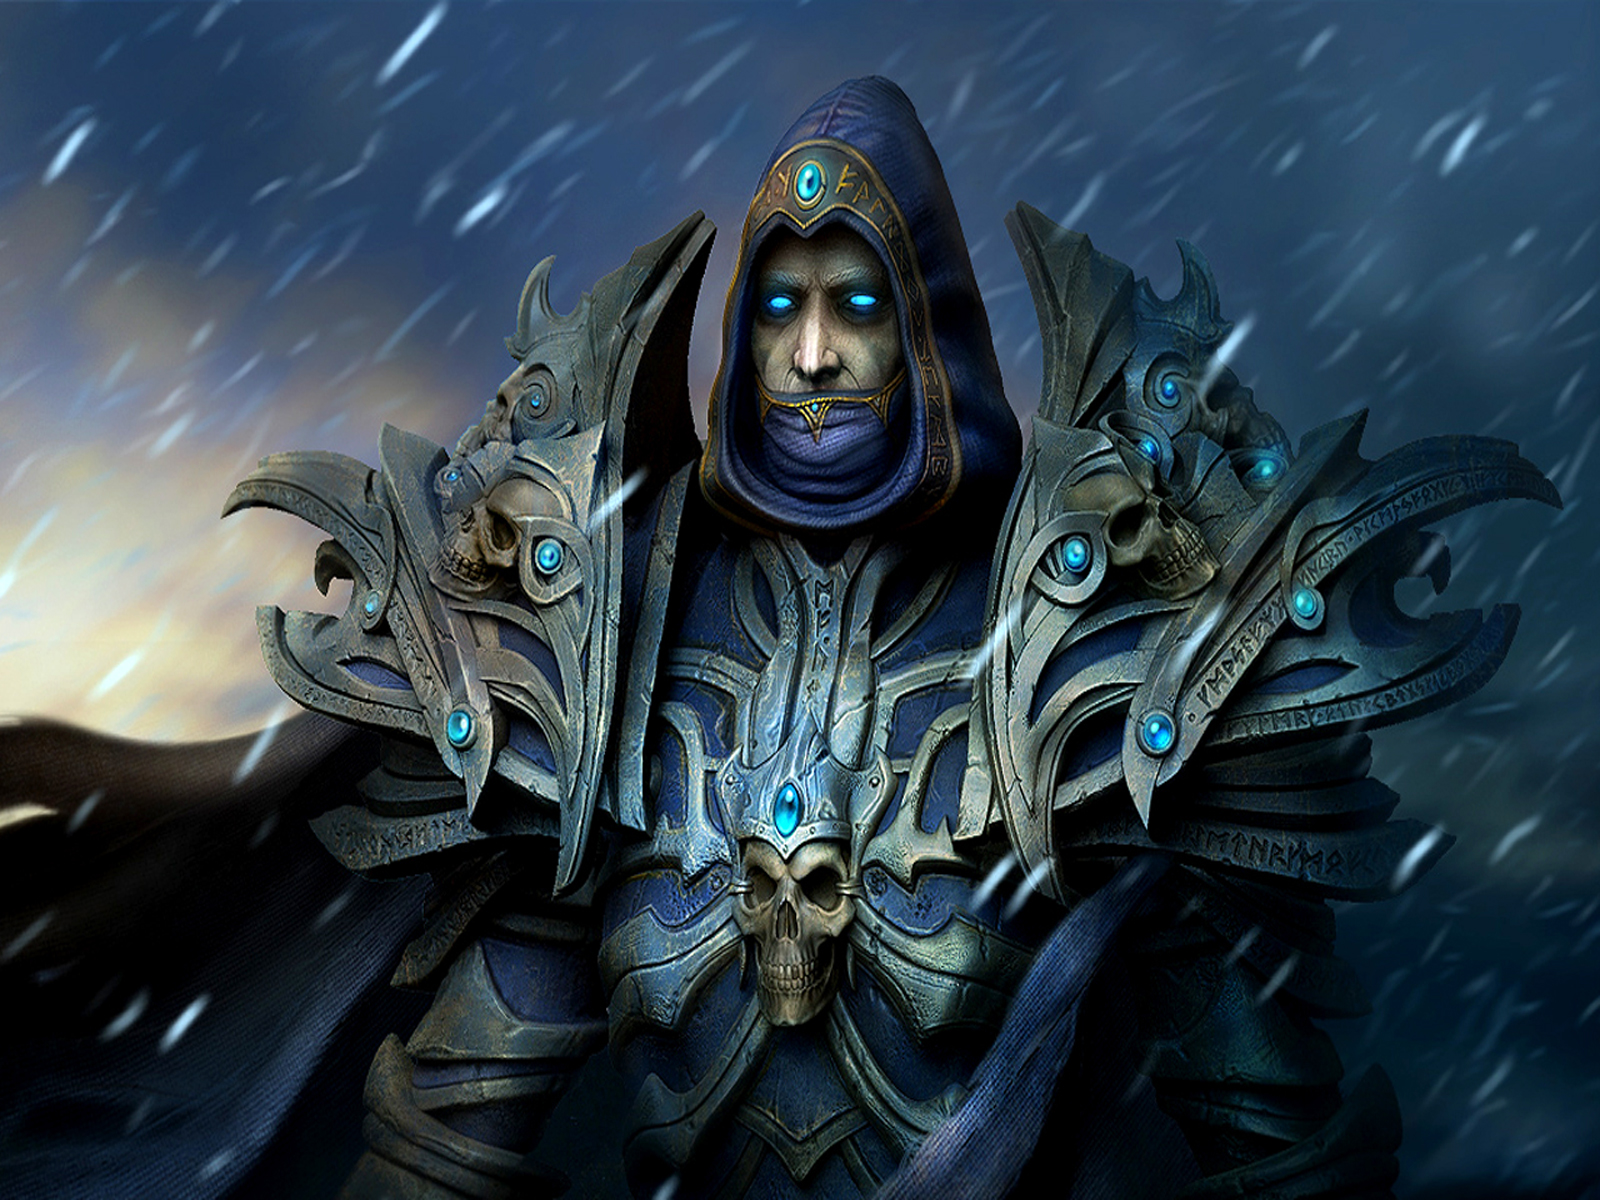 Baron Rivendare - World of Warcraft character that immerses players in a captivating video game.